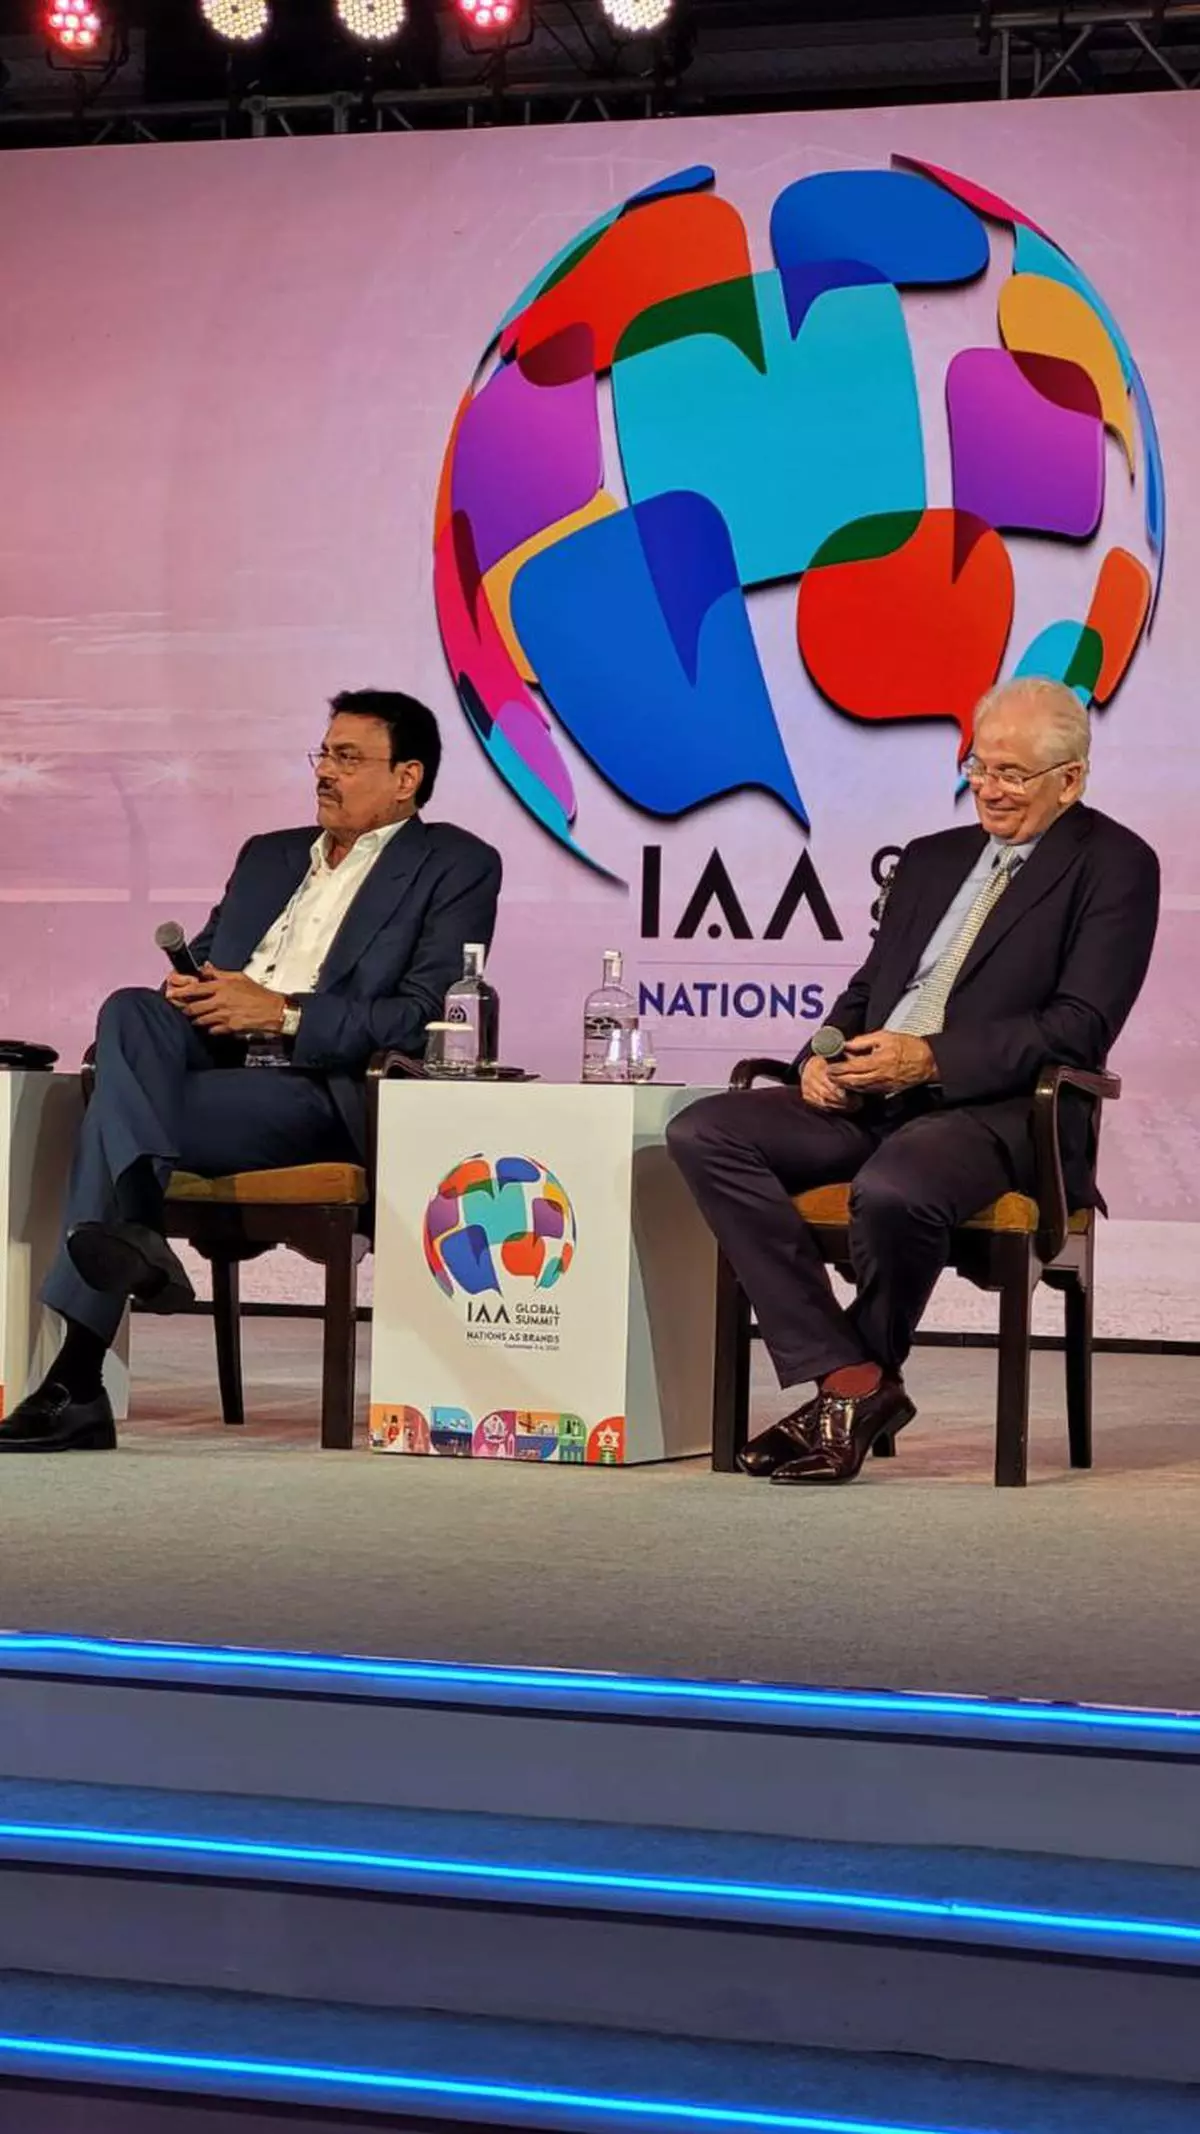 Dilip Vengsarkar and David Gower during a panel discussion on the evolution of Cricket at the International Advertising Association’s Global Summit on Nations.